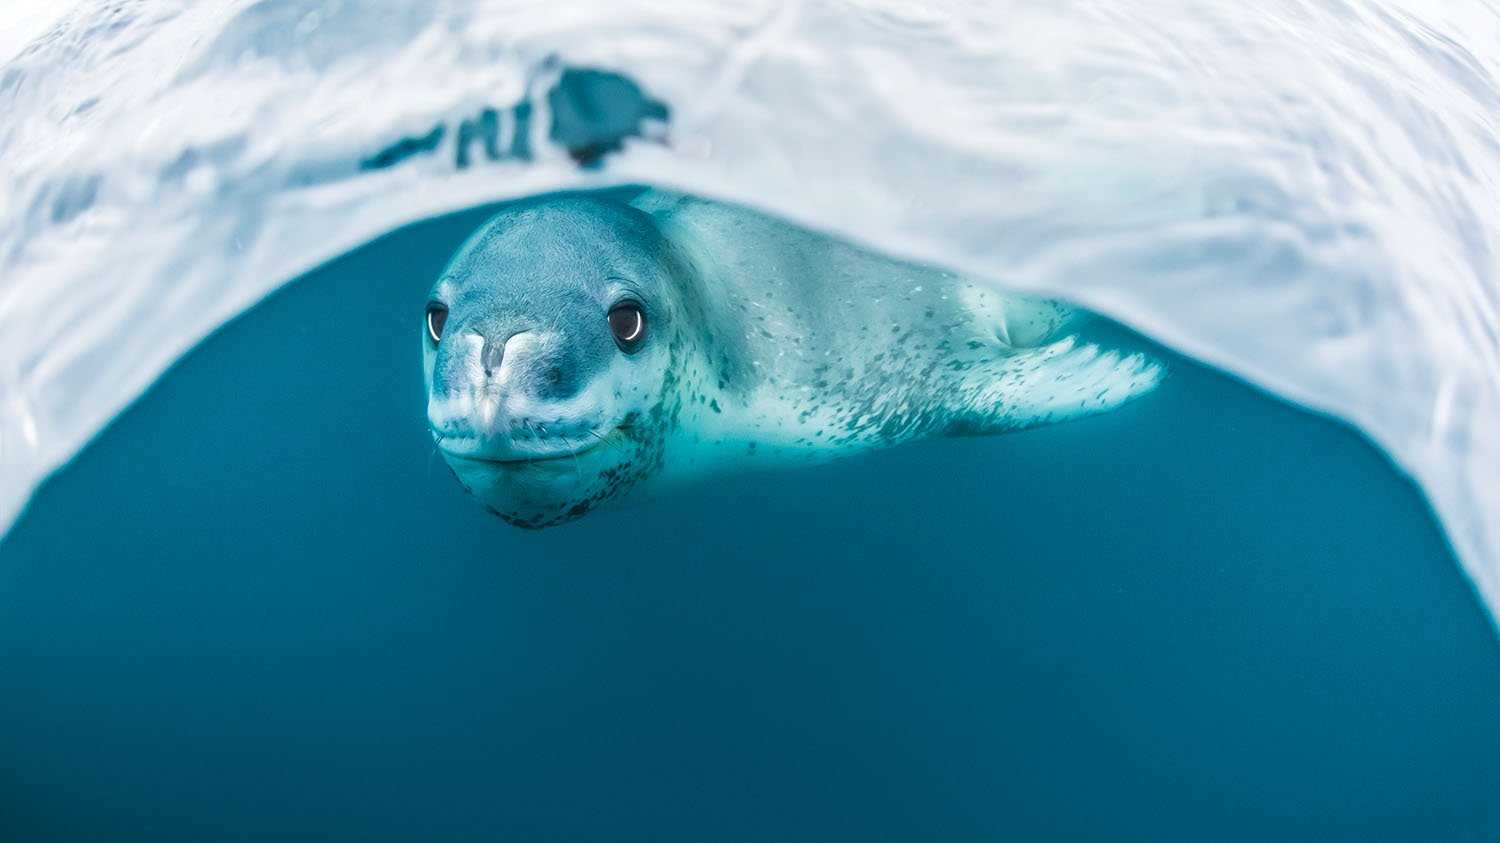 A seal just underwater underneath a glacier looks directly at the camera.